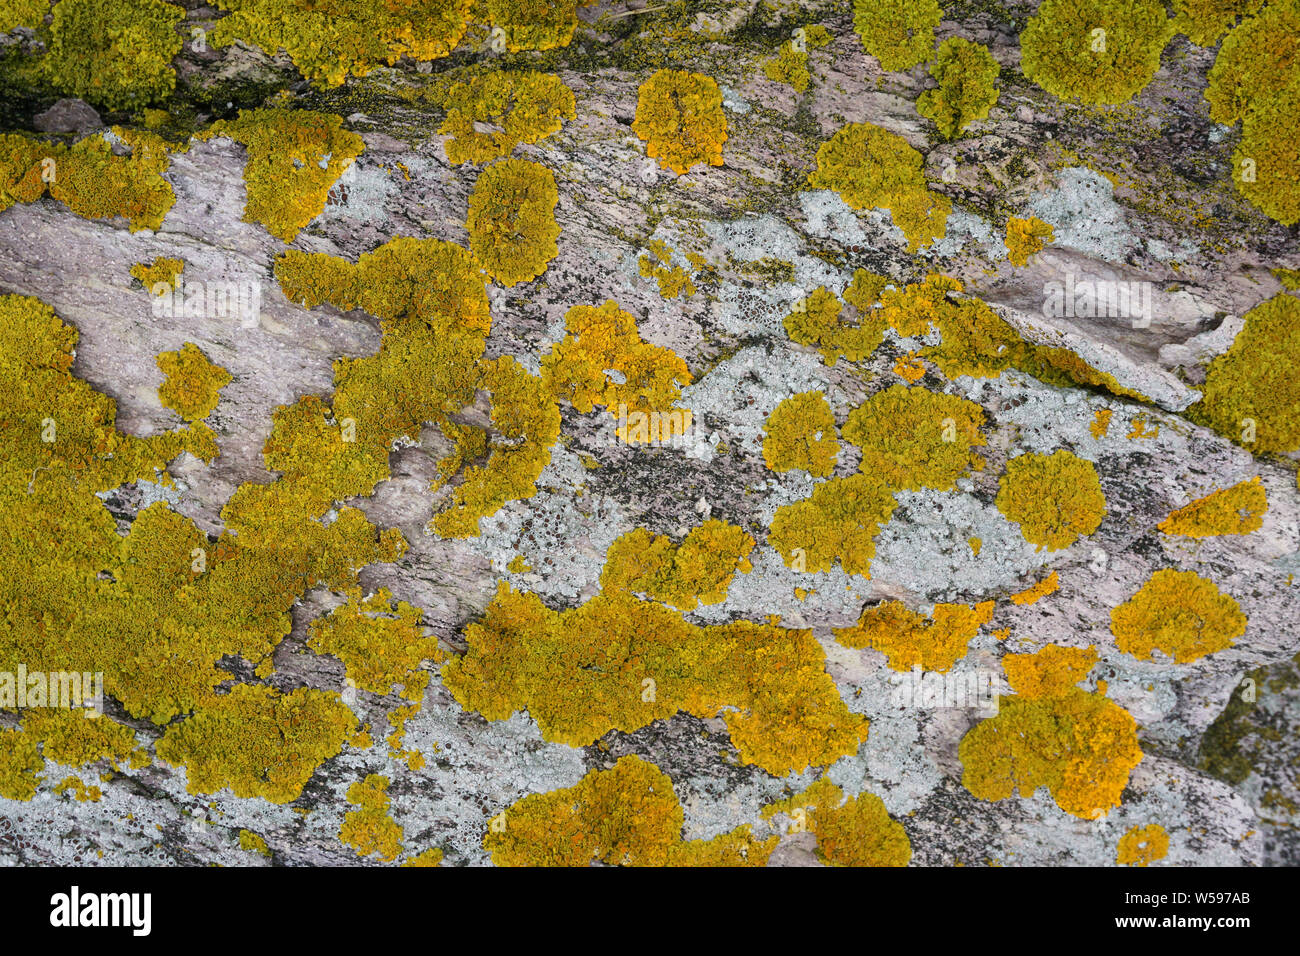 Yellow and grey lichen growing on granite Stock Photo